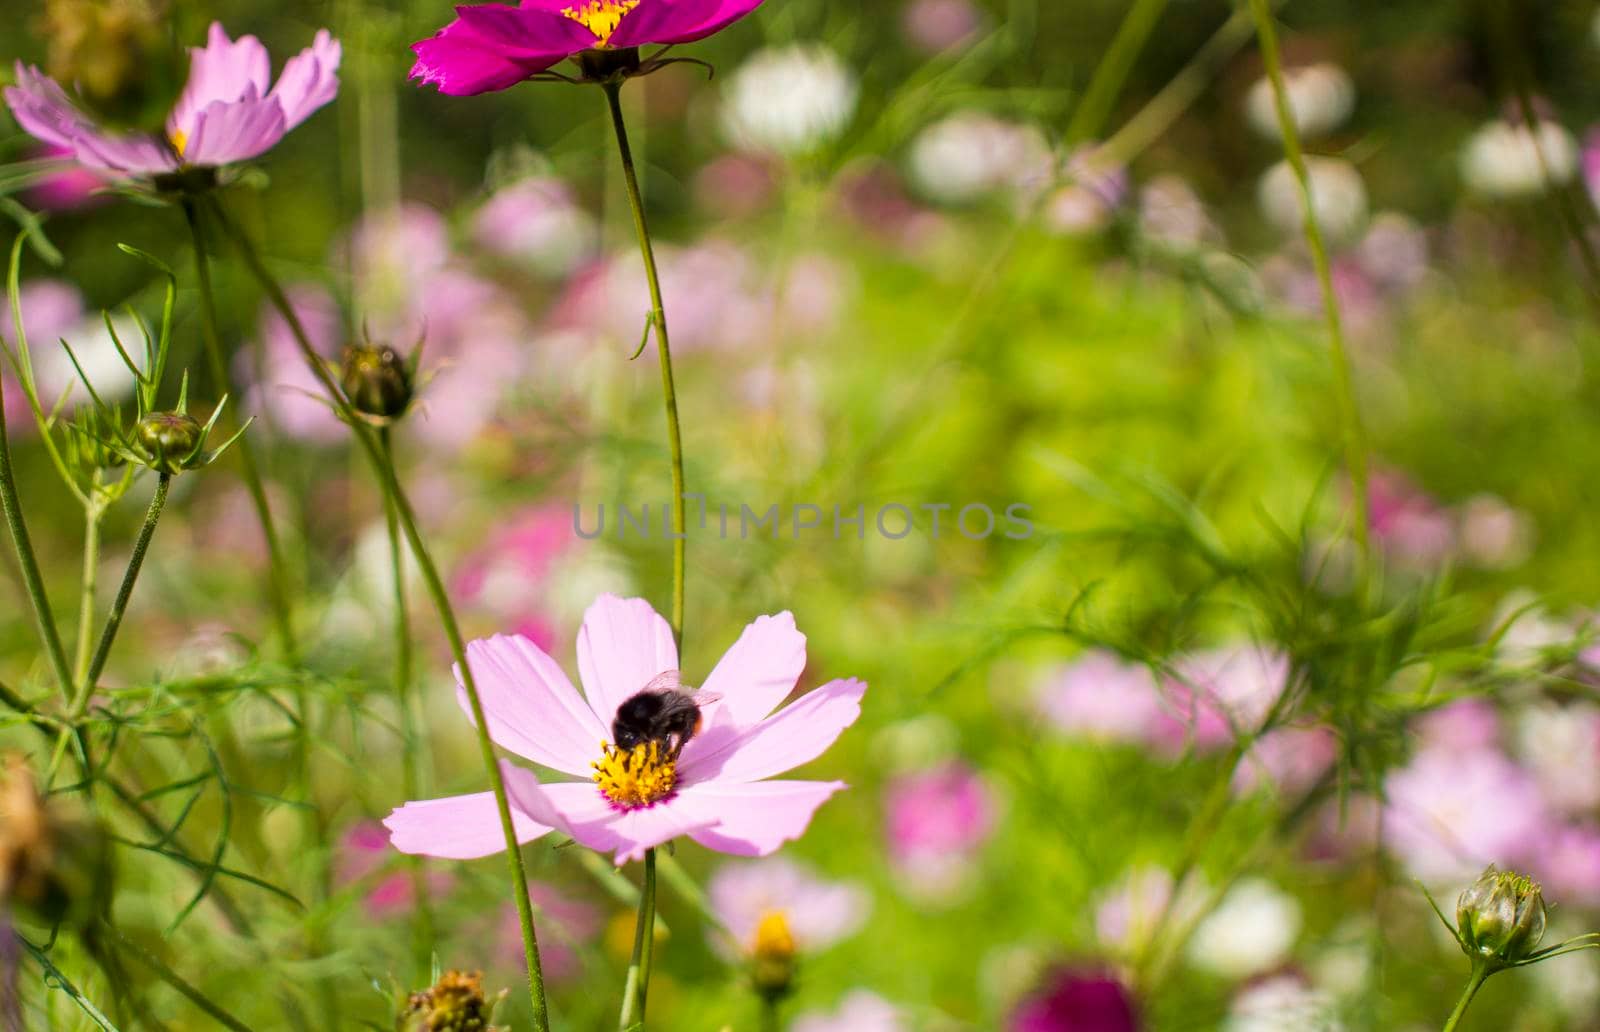 young bumblebee bathing in the pollen of a pink daisies flower on a flowerbed against a background of green leaves